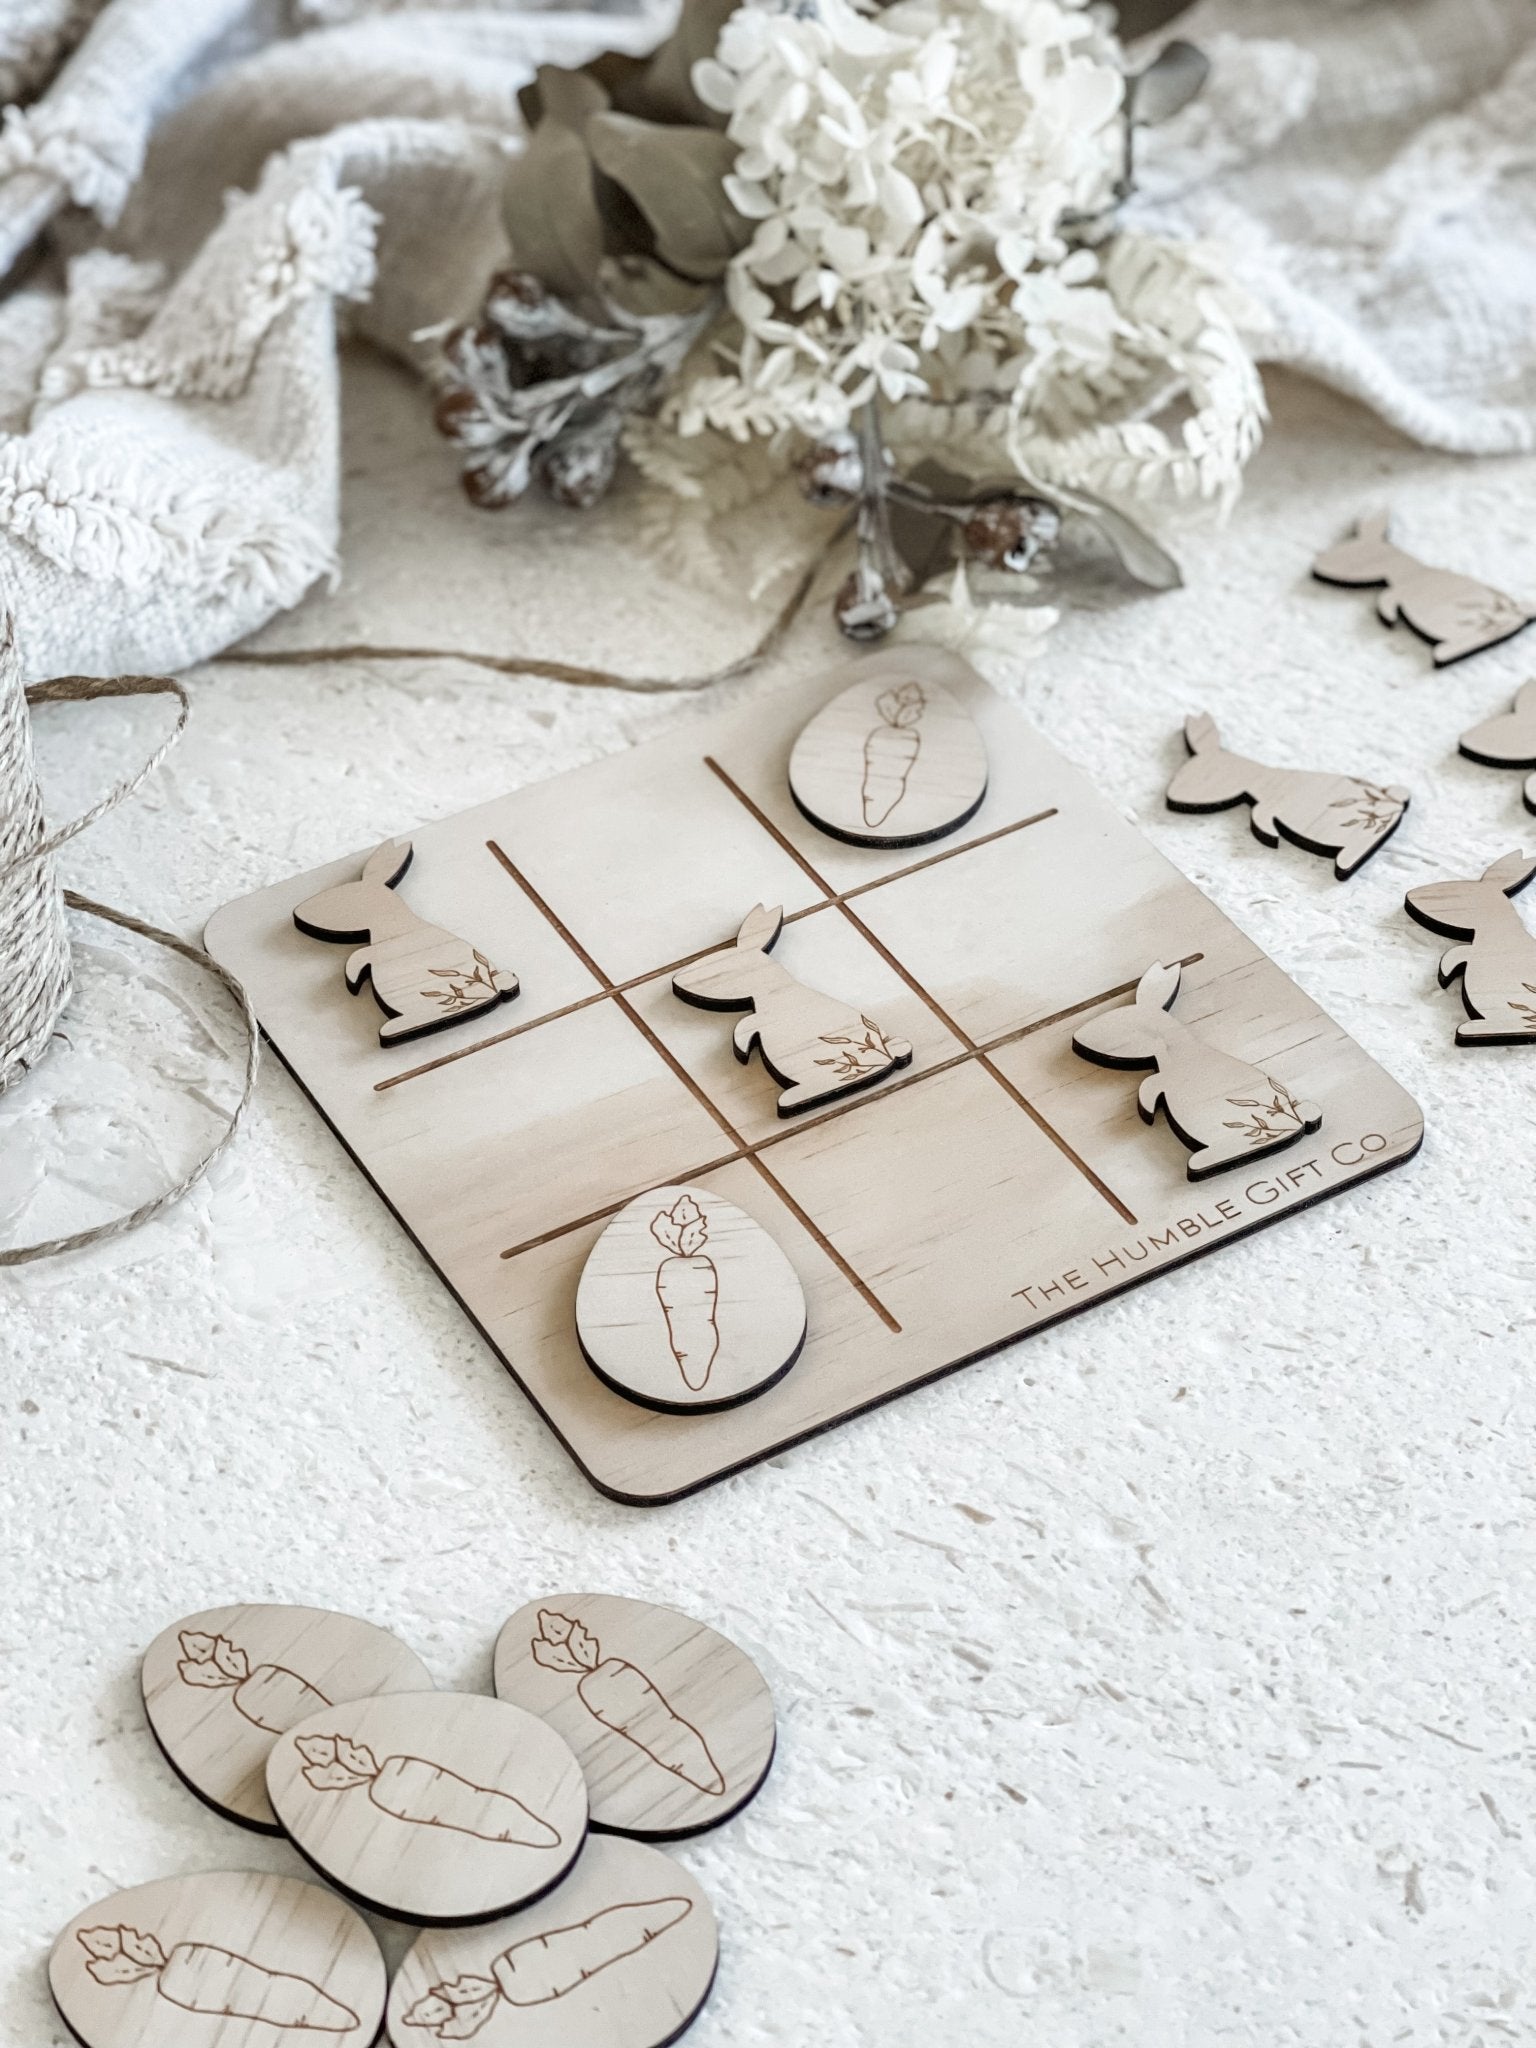 Easter Tic Tac Toe - The Humble Gift Co.